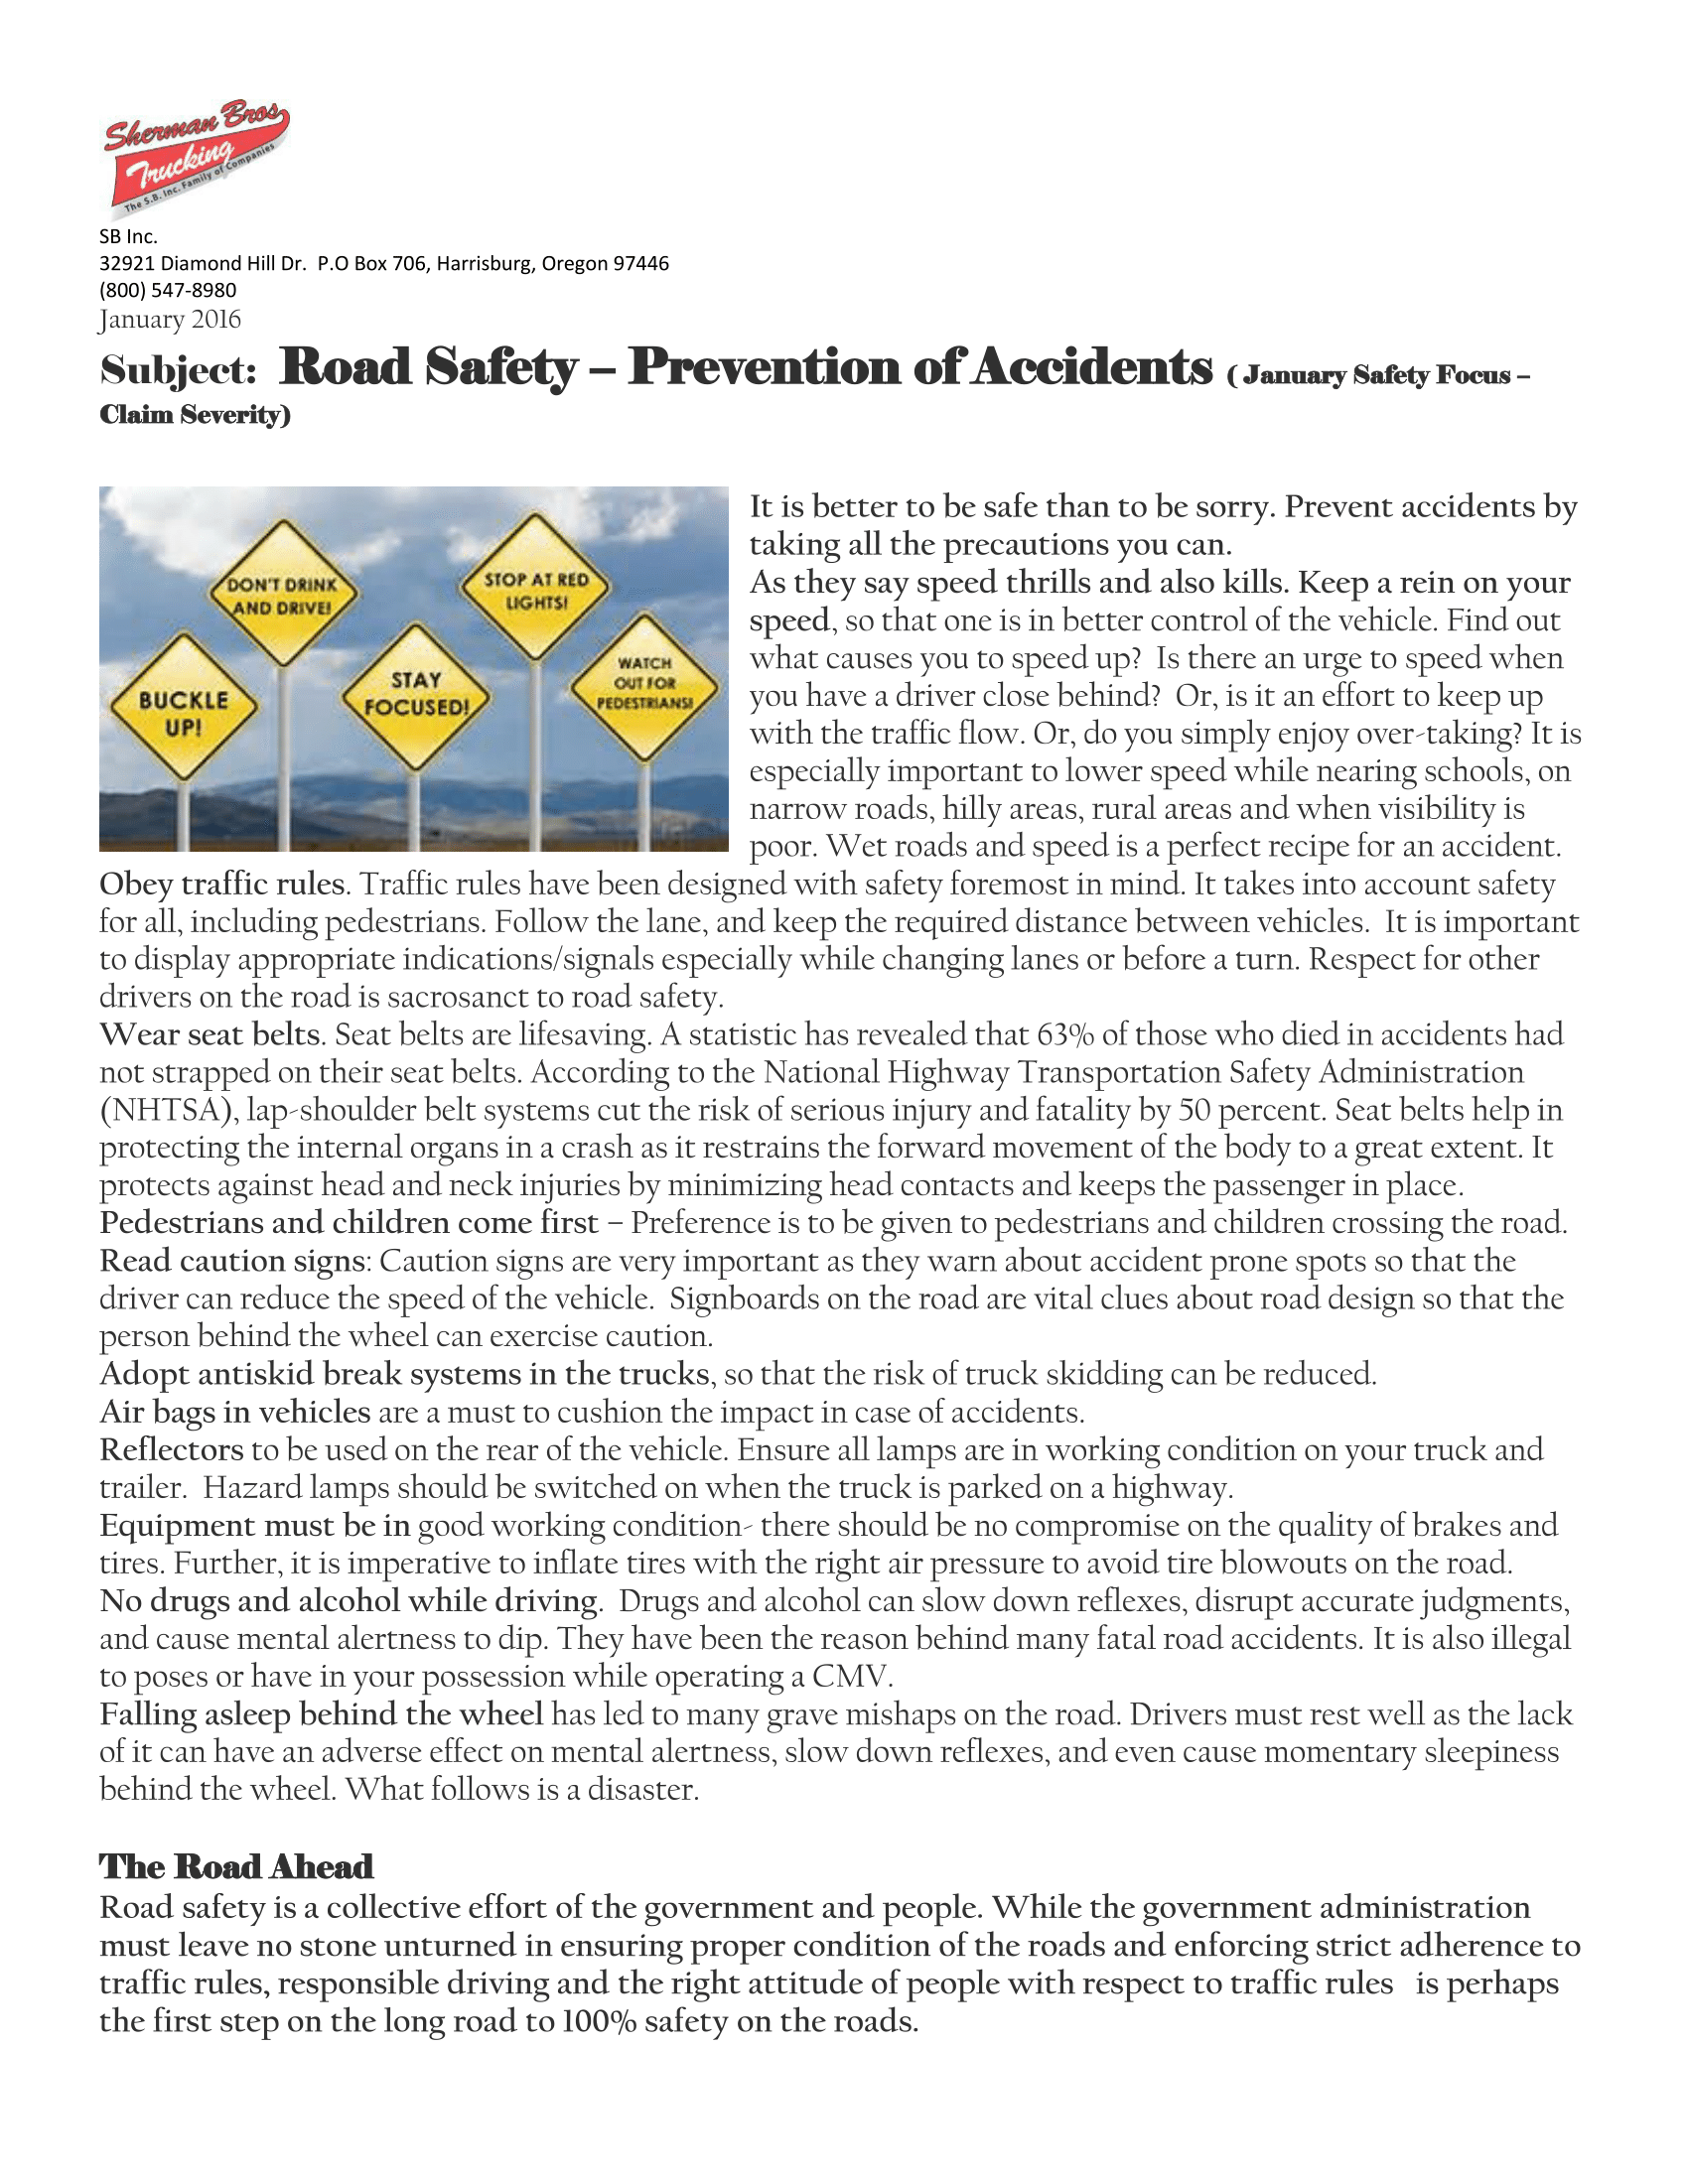 Jan - Prevention of Accidents Road Safety-1.png